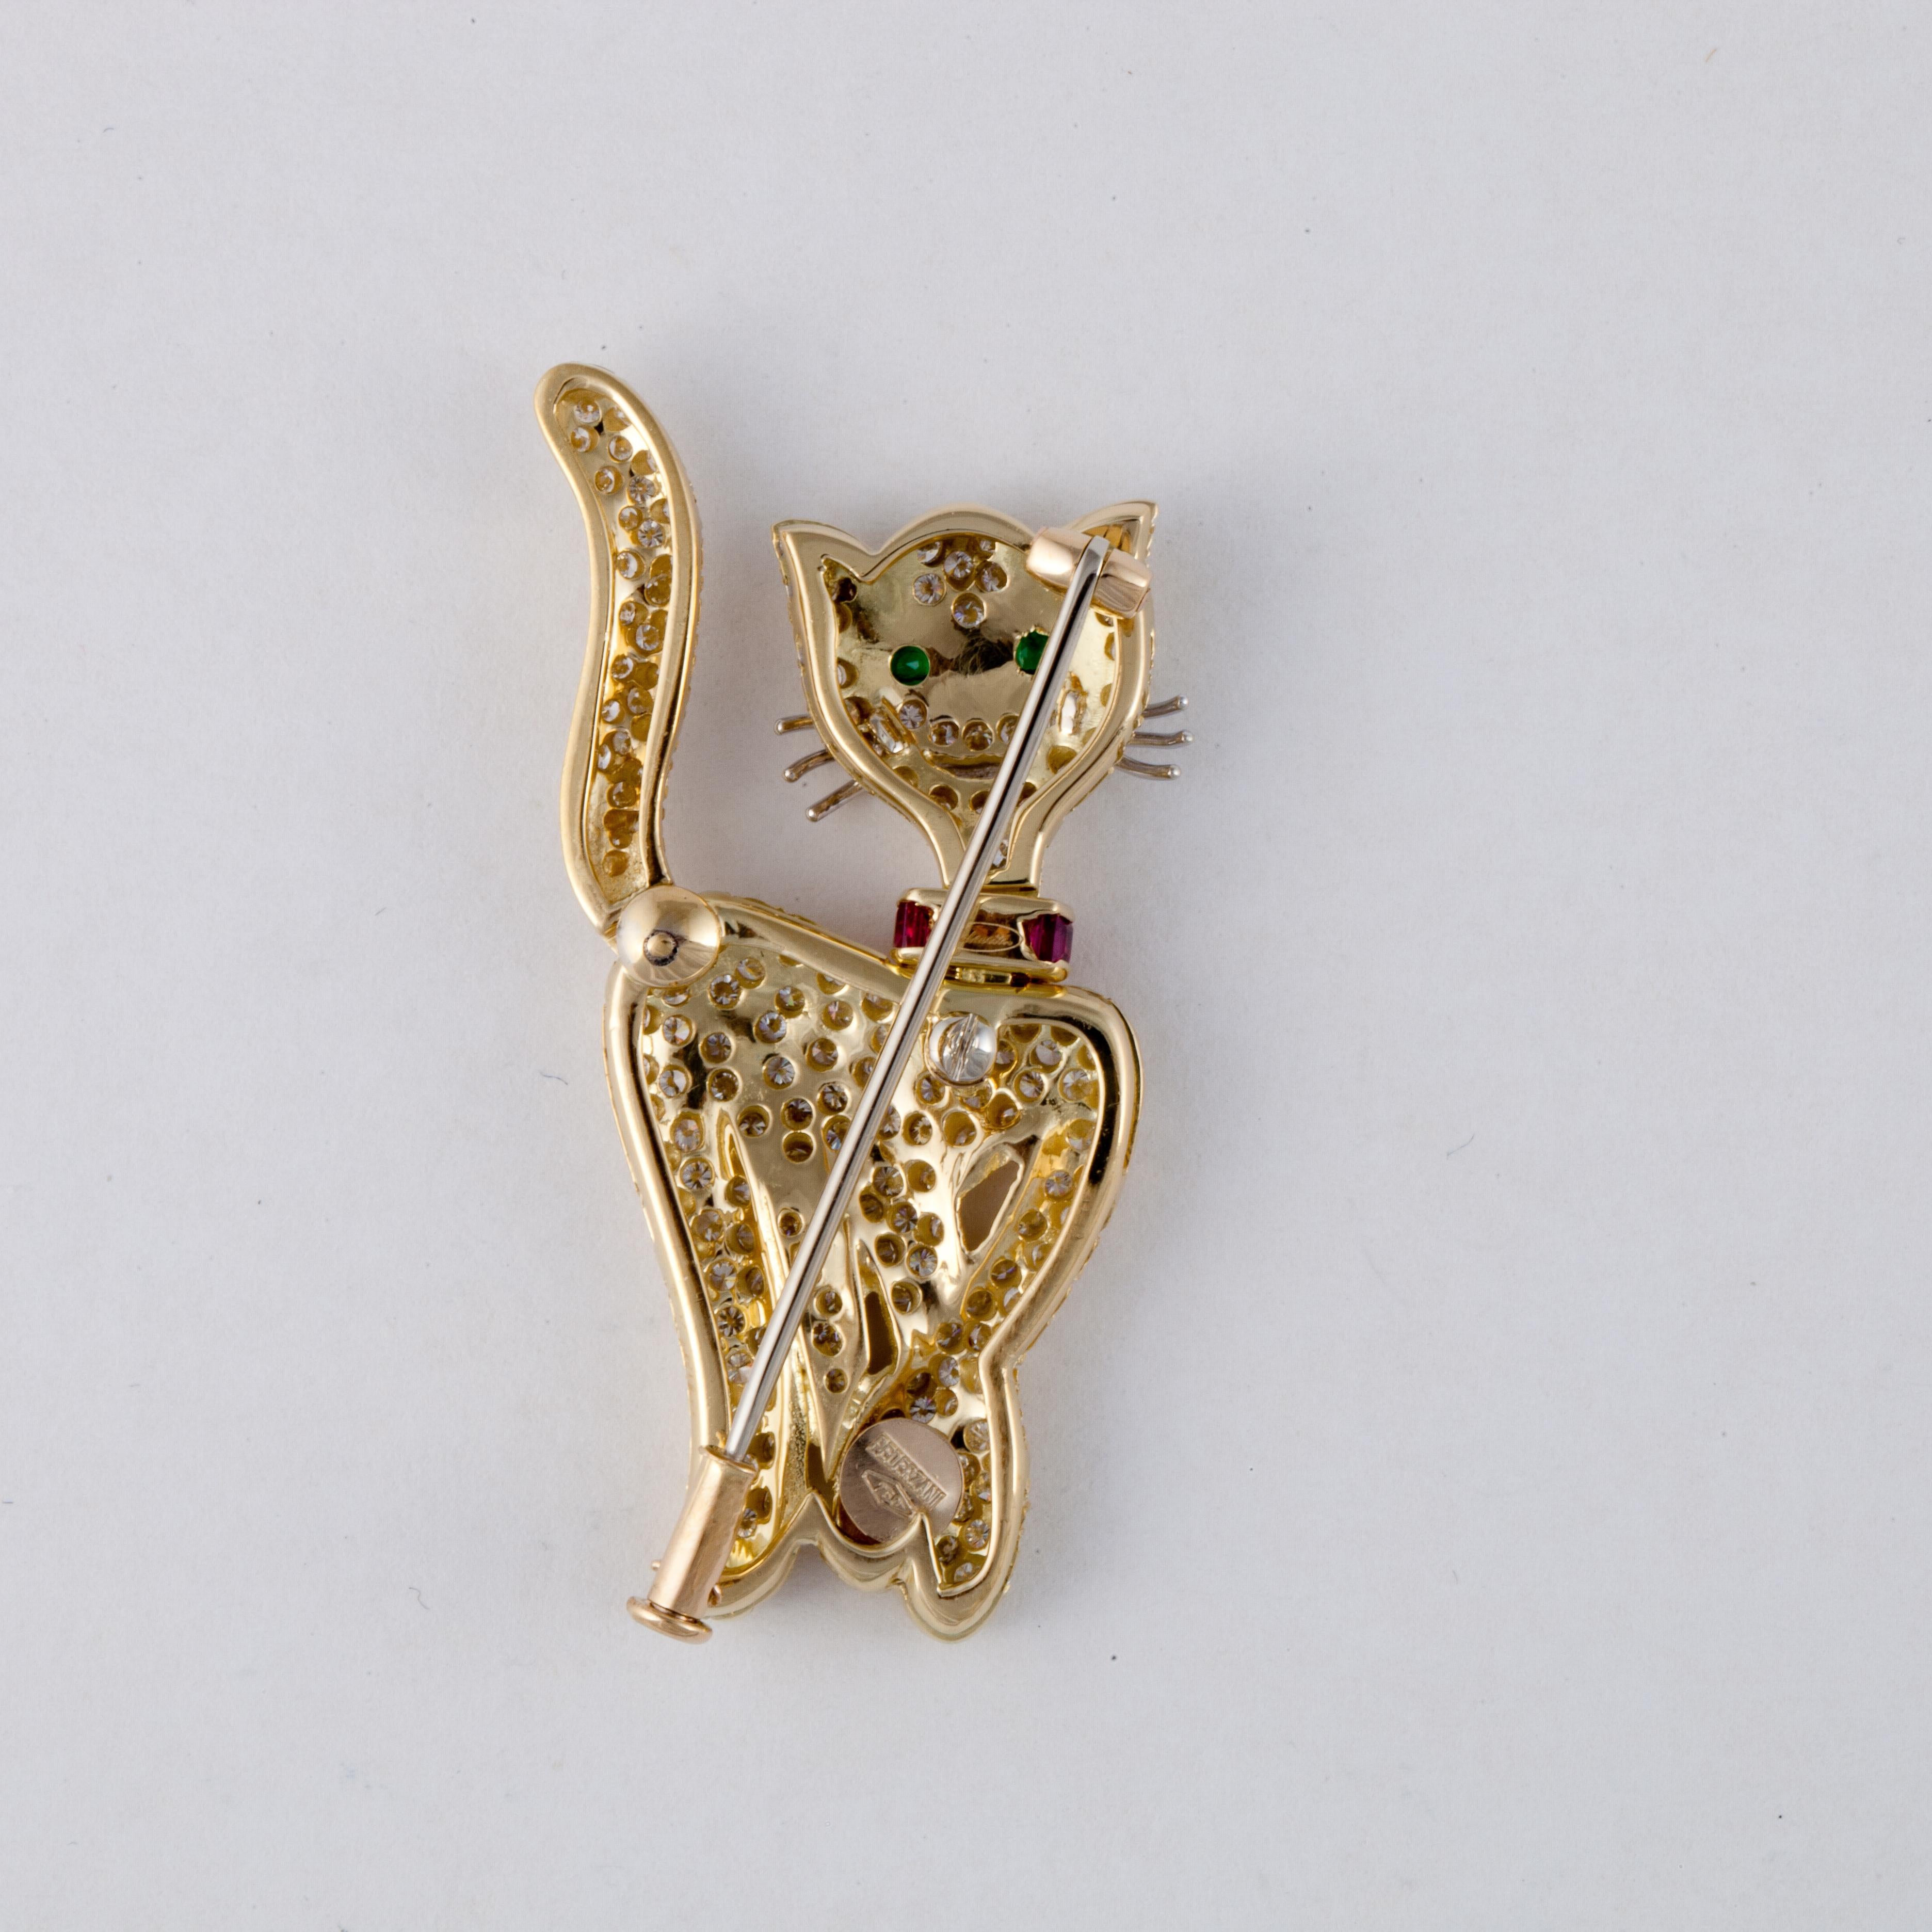 Pederzani cat pin composed of 18K yellow gold with diamonds, rubies and emeralds.  Signed 